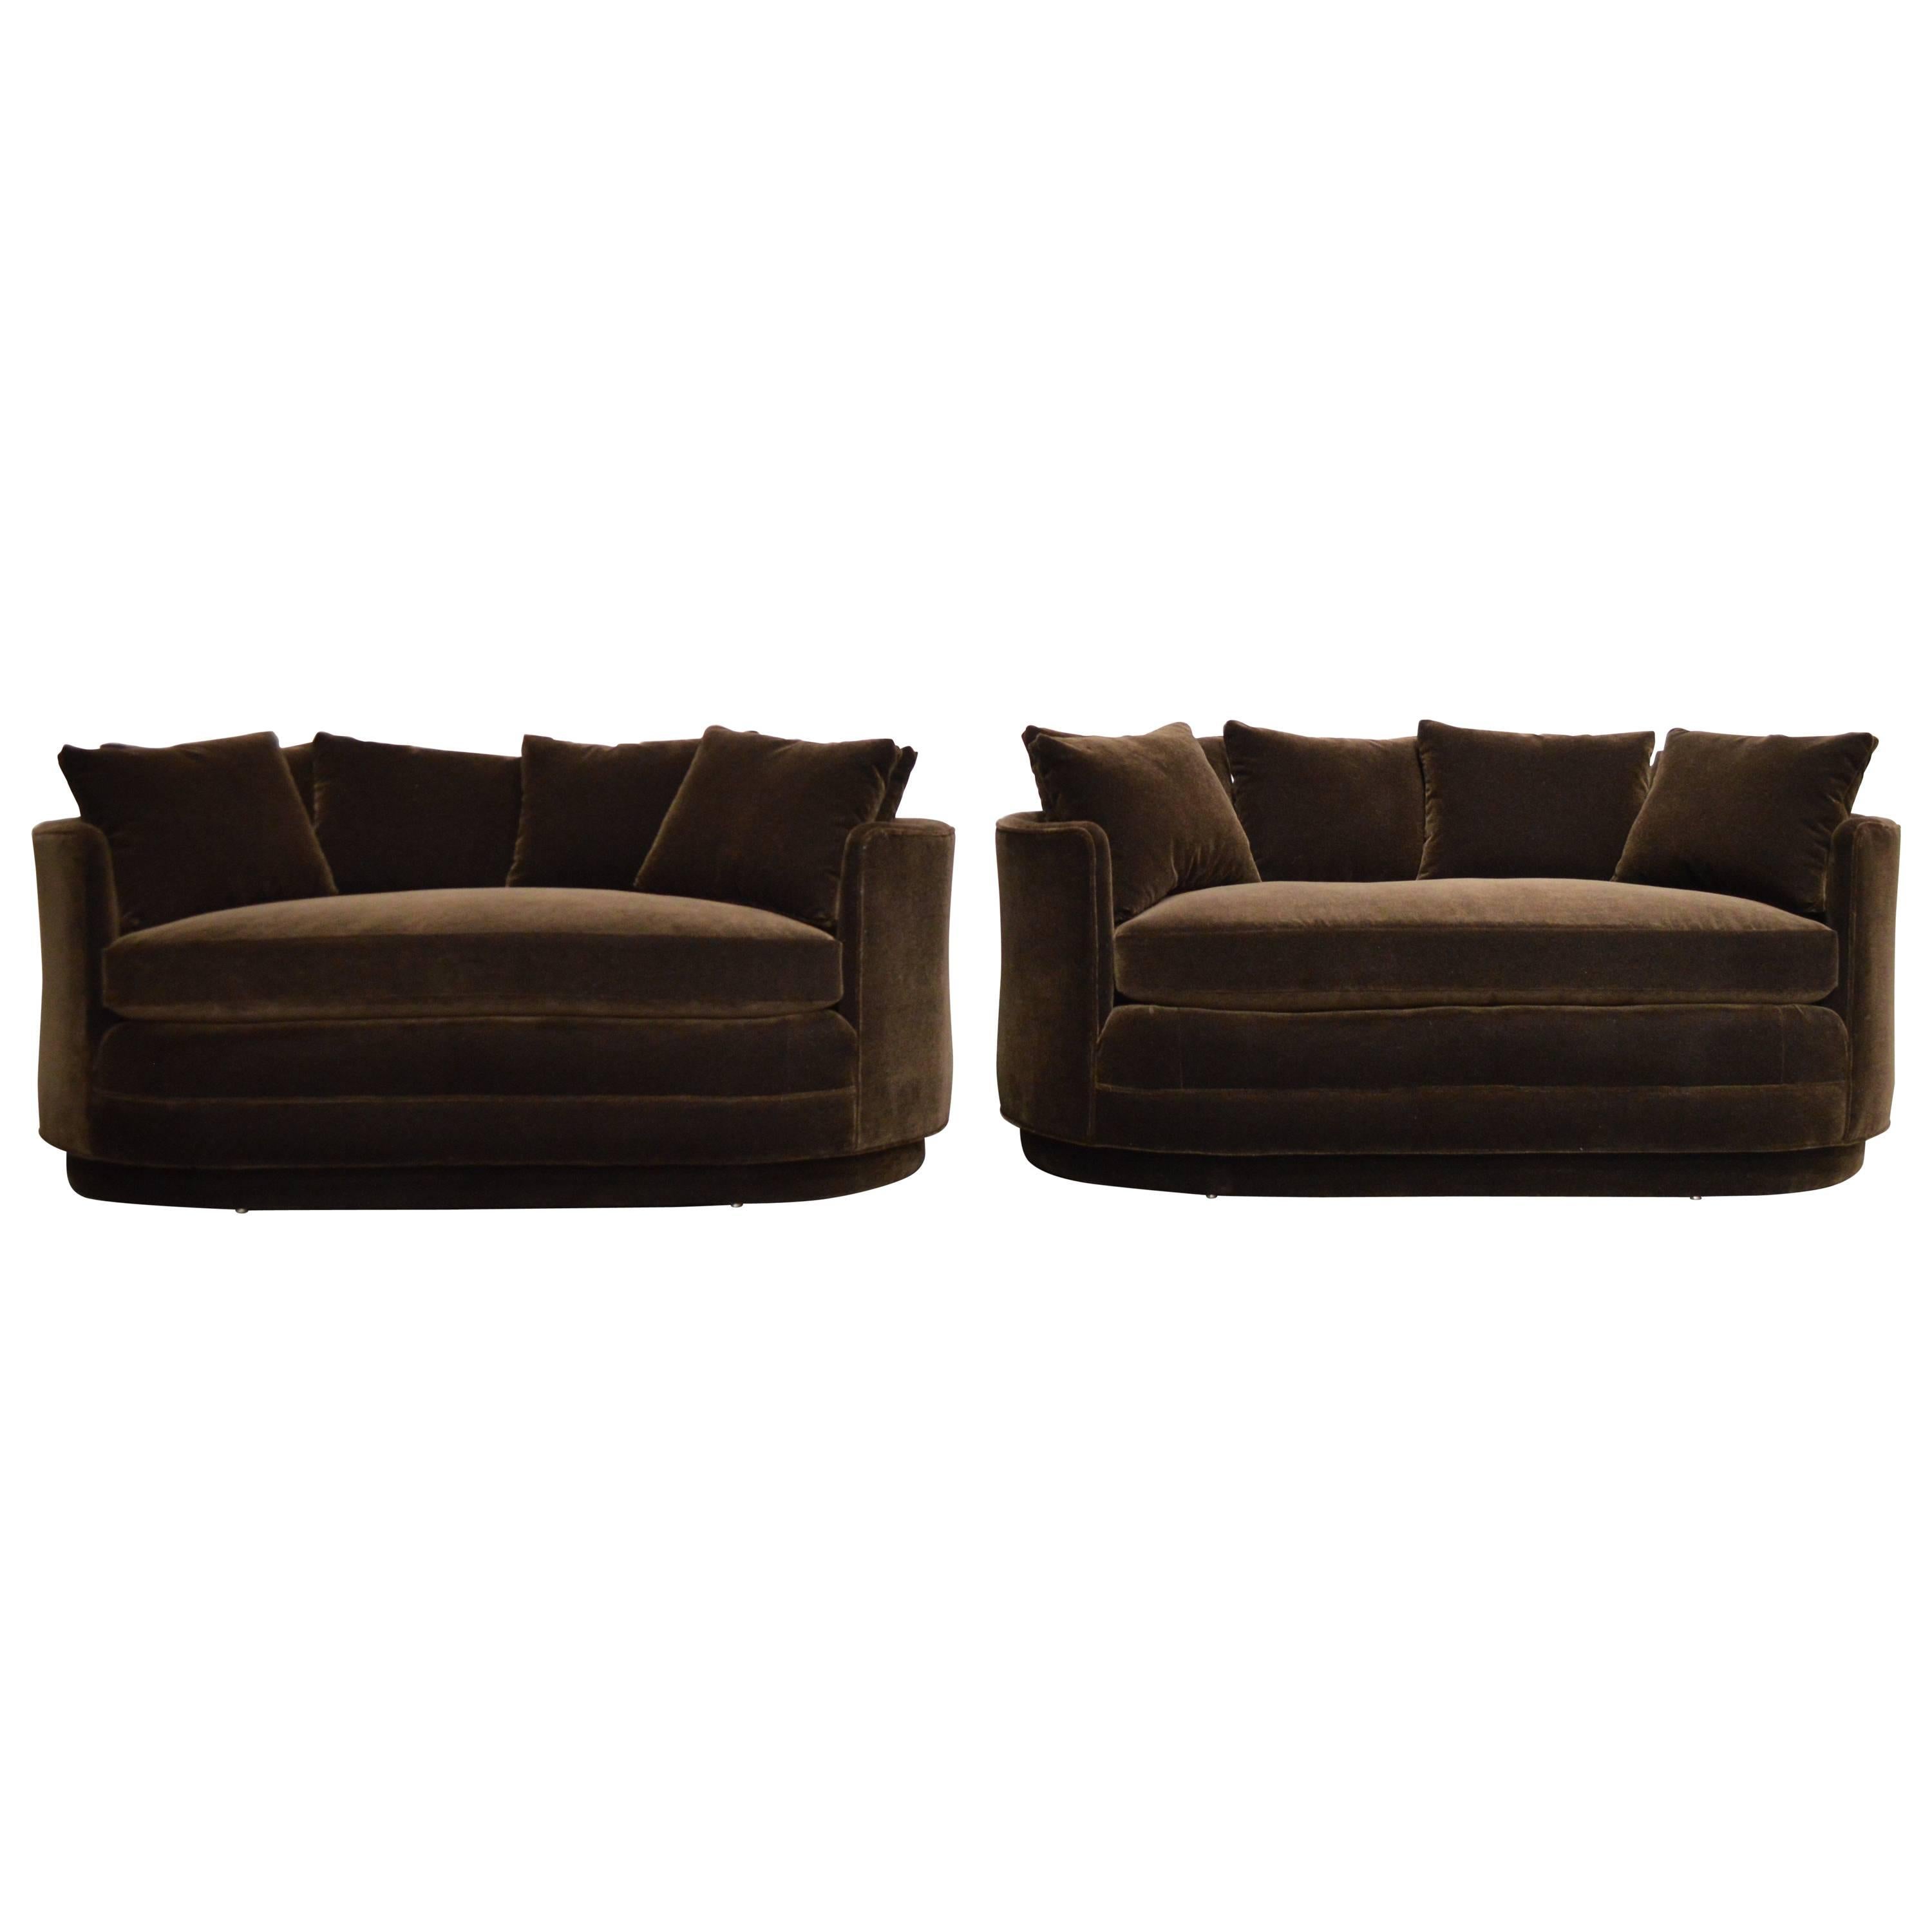 Pair of Vintage Curved Loveseat Sofas in Chocolate Brown Mohair